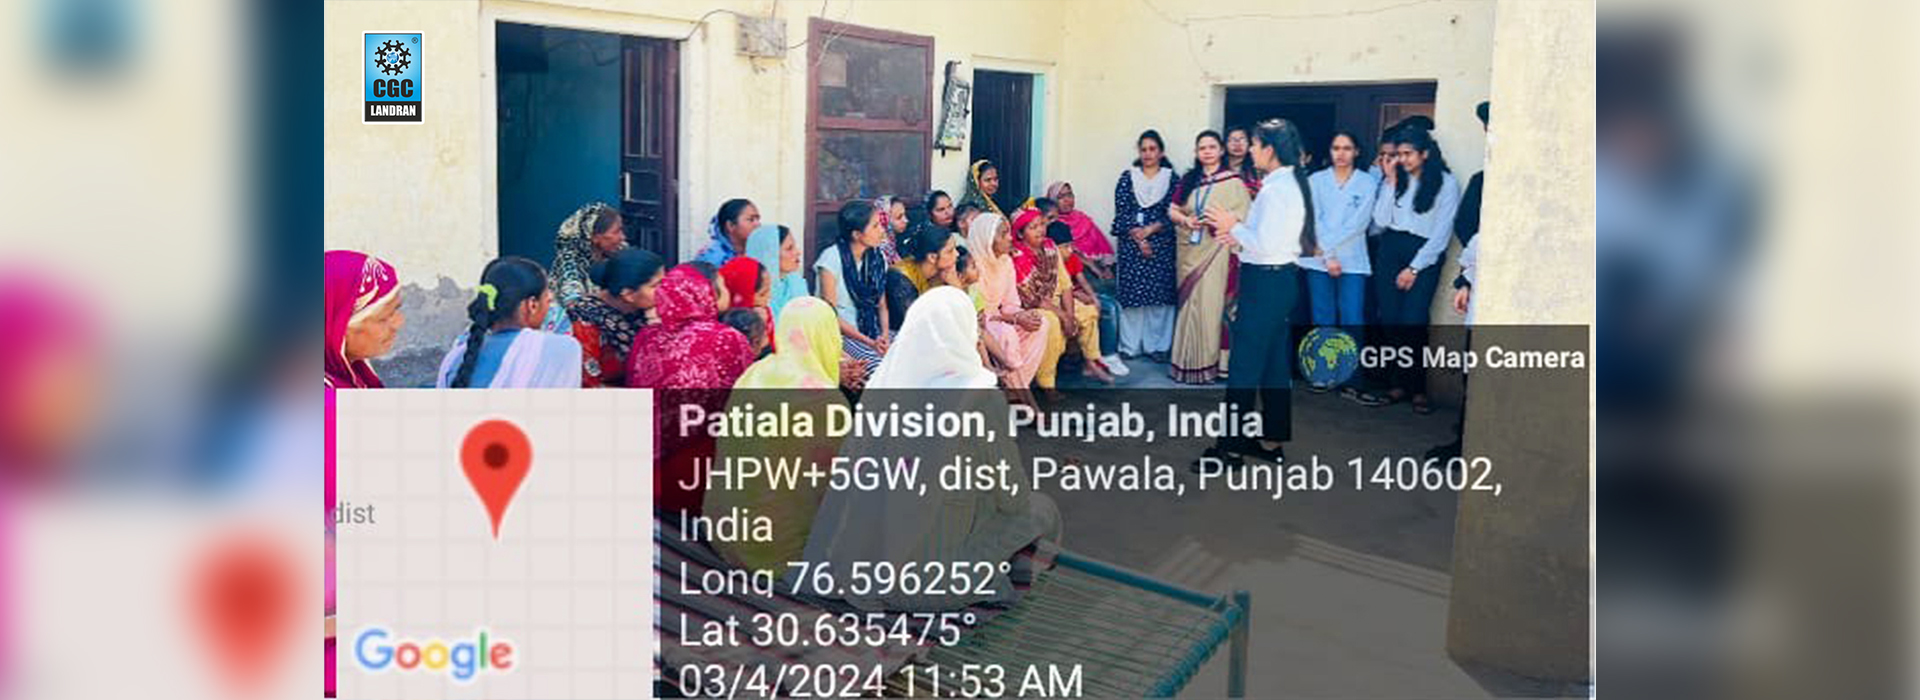 Chandigarh College of Hospitality Students Explore Millet's Role in Sustainability at Pawala Village, Fatehgarh Sahib 